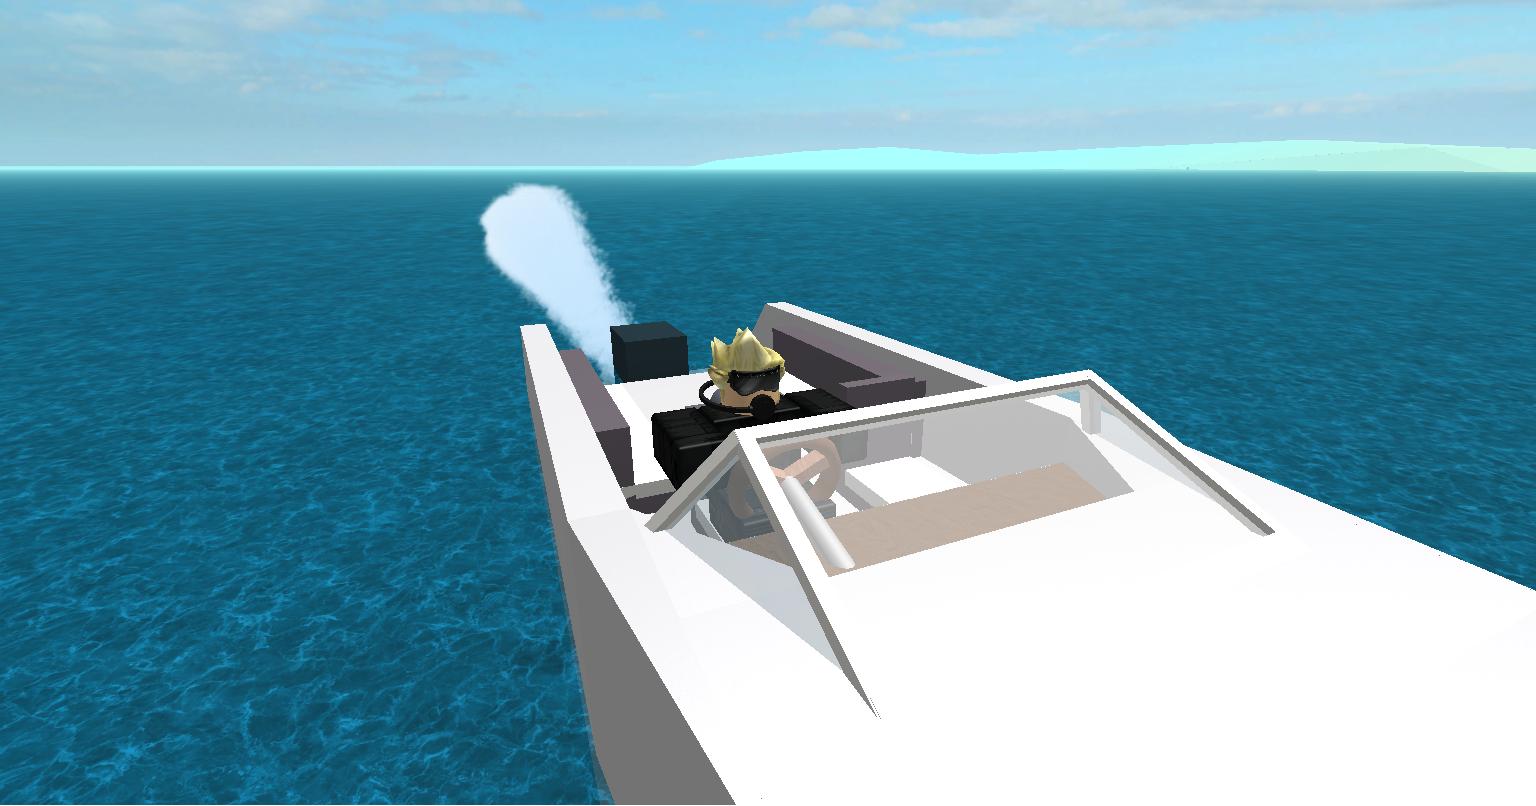 Alex Hicks On Twitter Roblox I M Making A Marine Biology Game I Made A Really Cool Underwater Fog Effect Http T Co Cub9qbkzt8 - roblox underwater effect